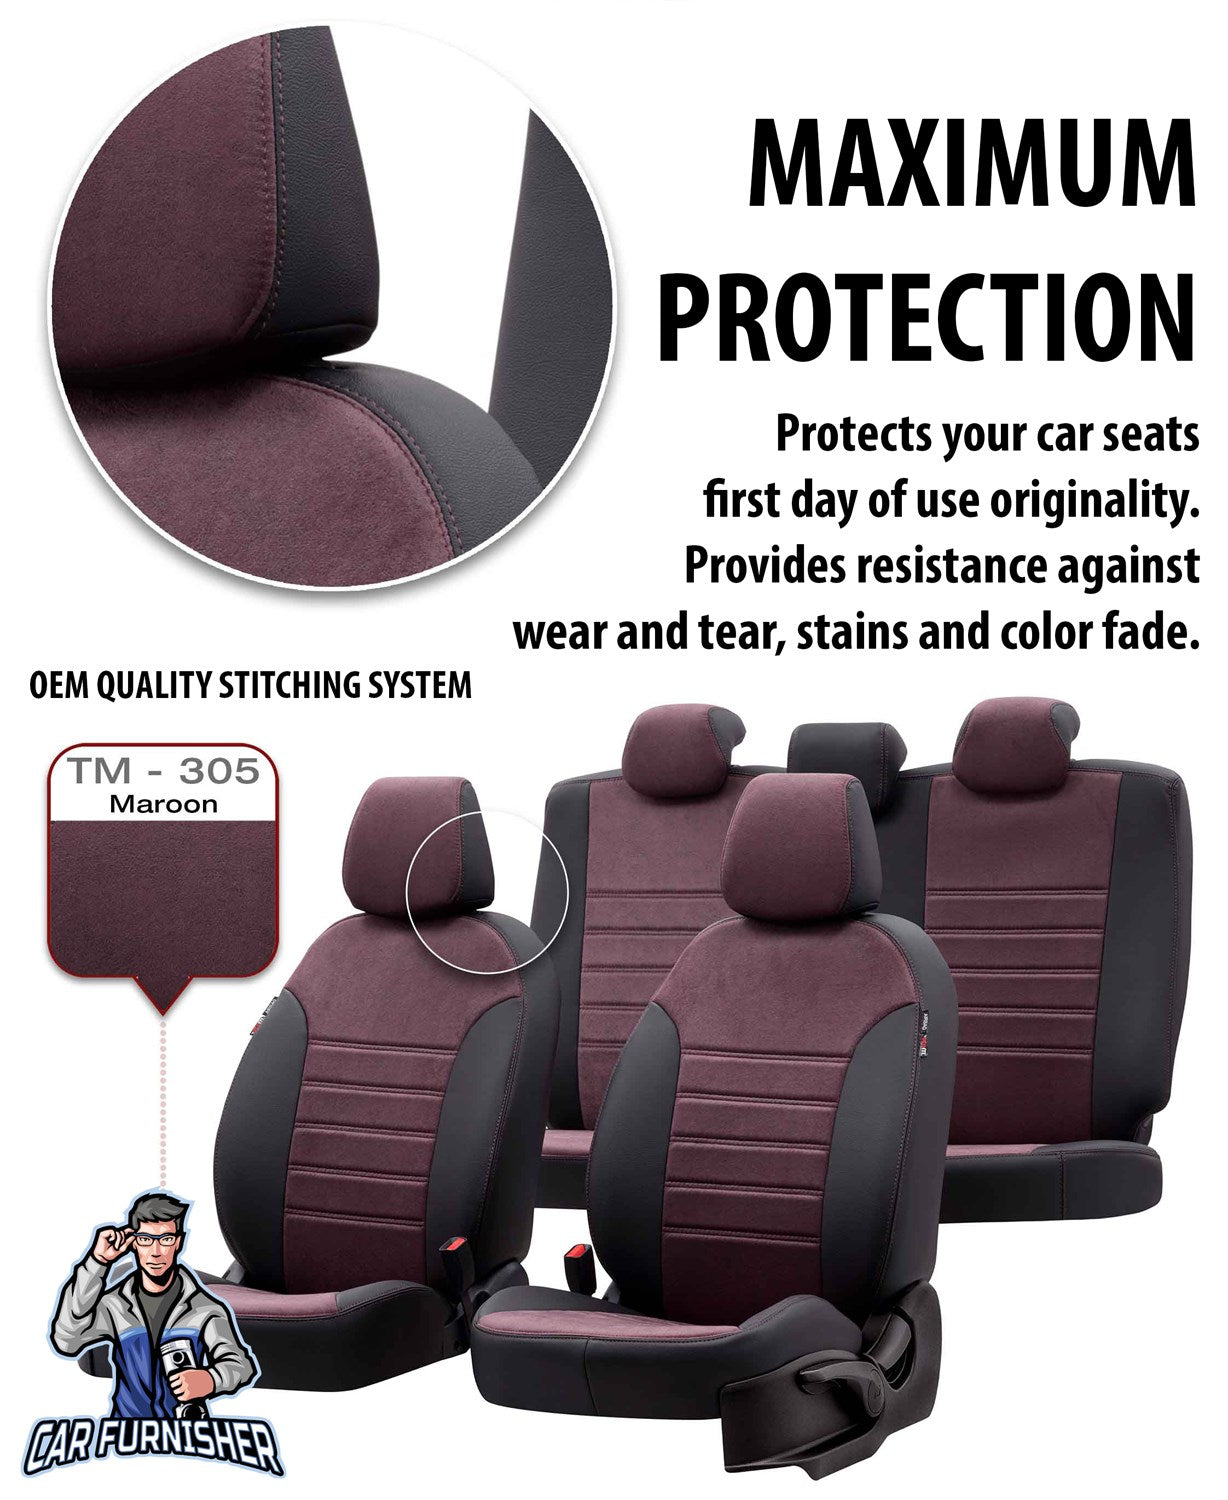 Hyundai Starex Seat Covers Milano Suede Design Burgundy Leather & Suede Fabric